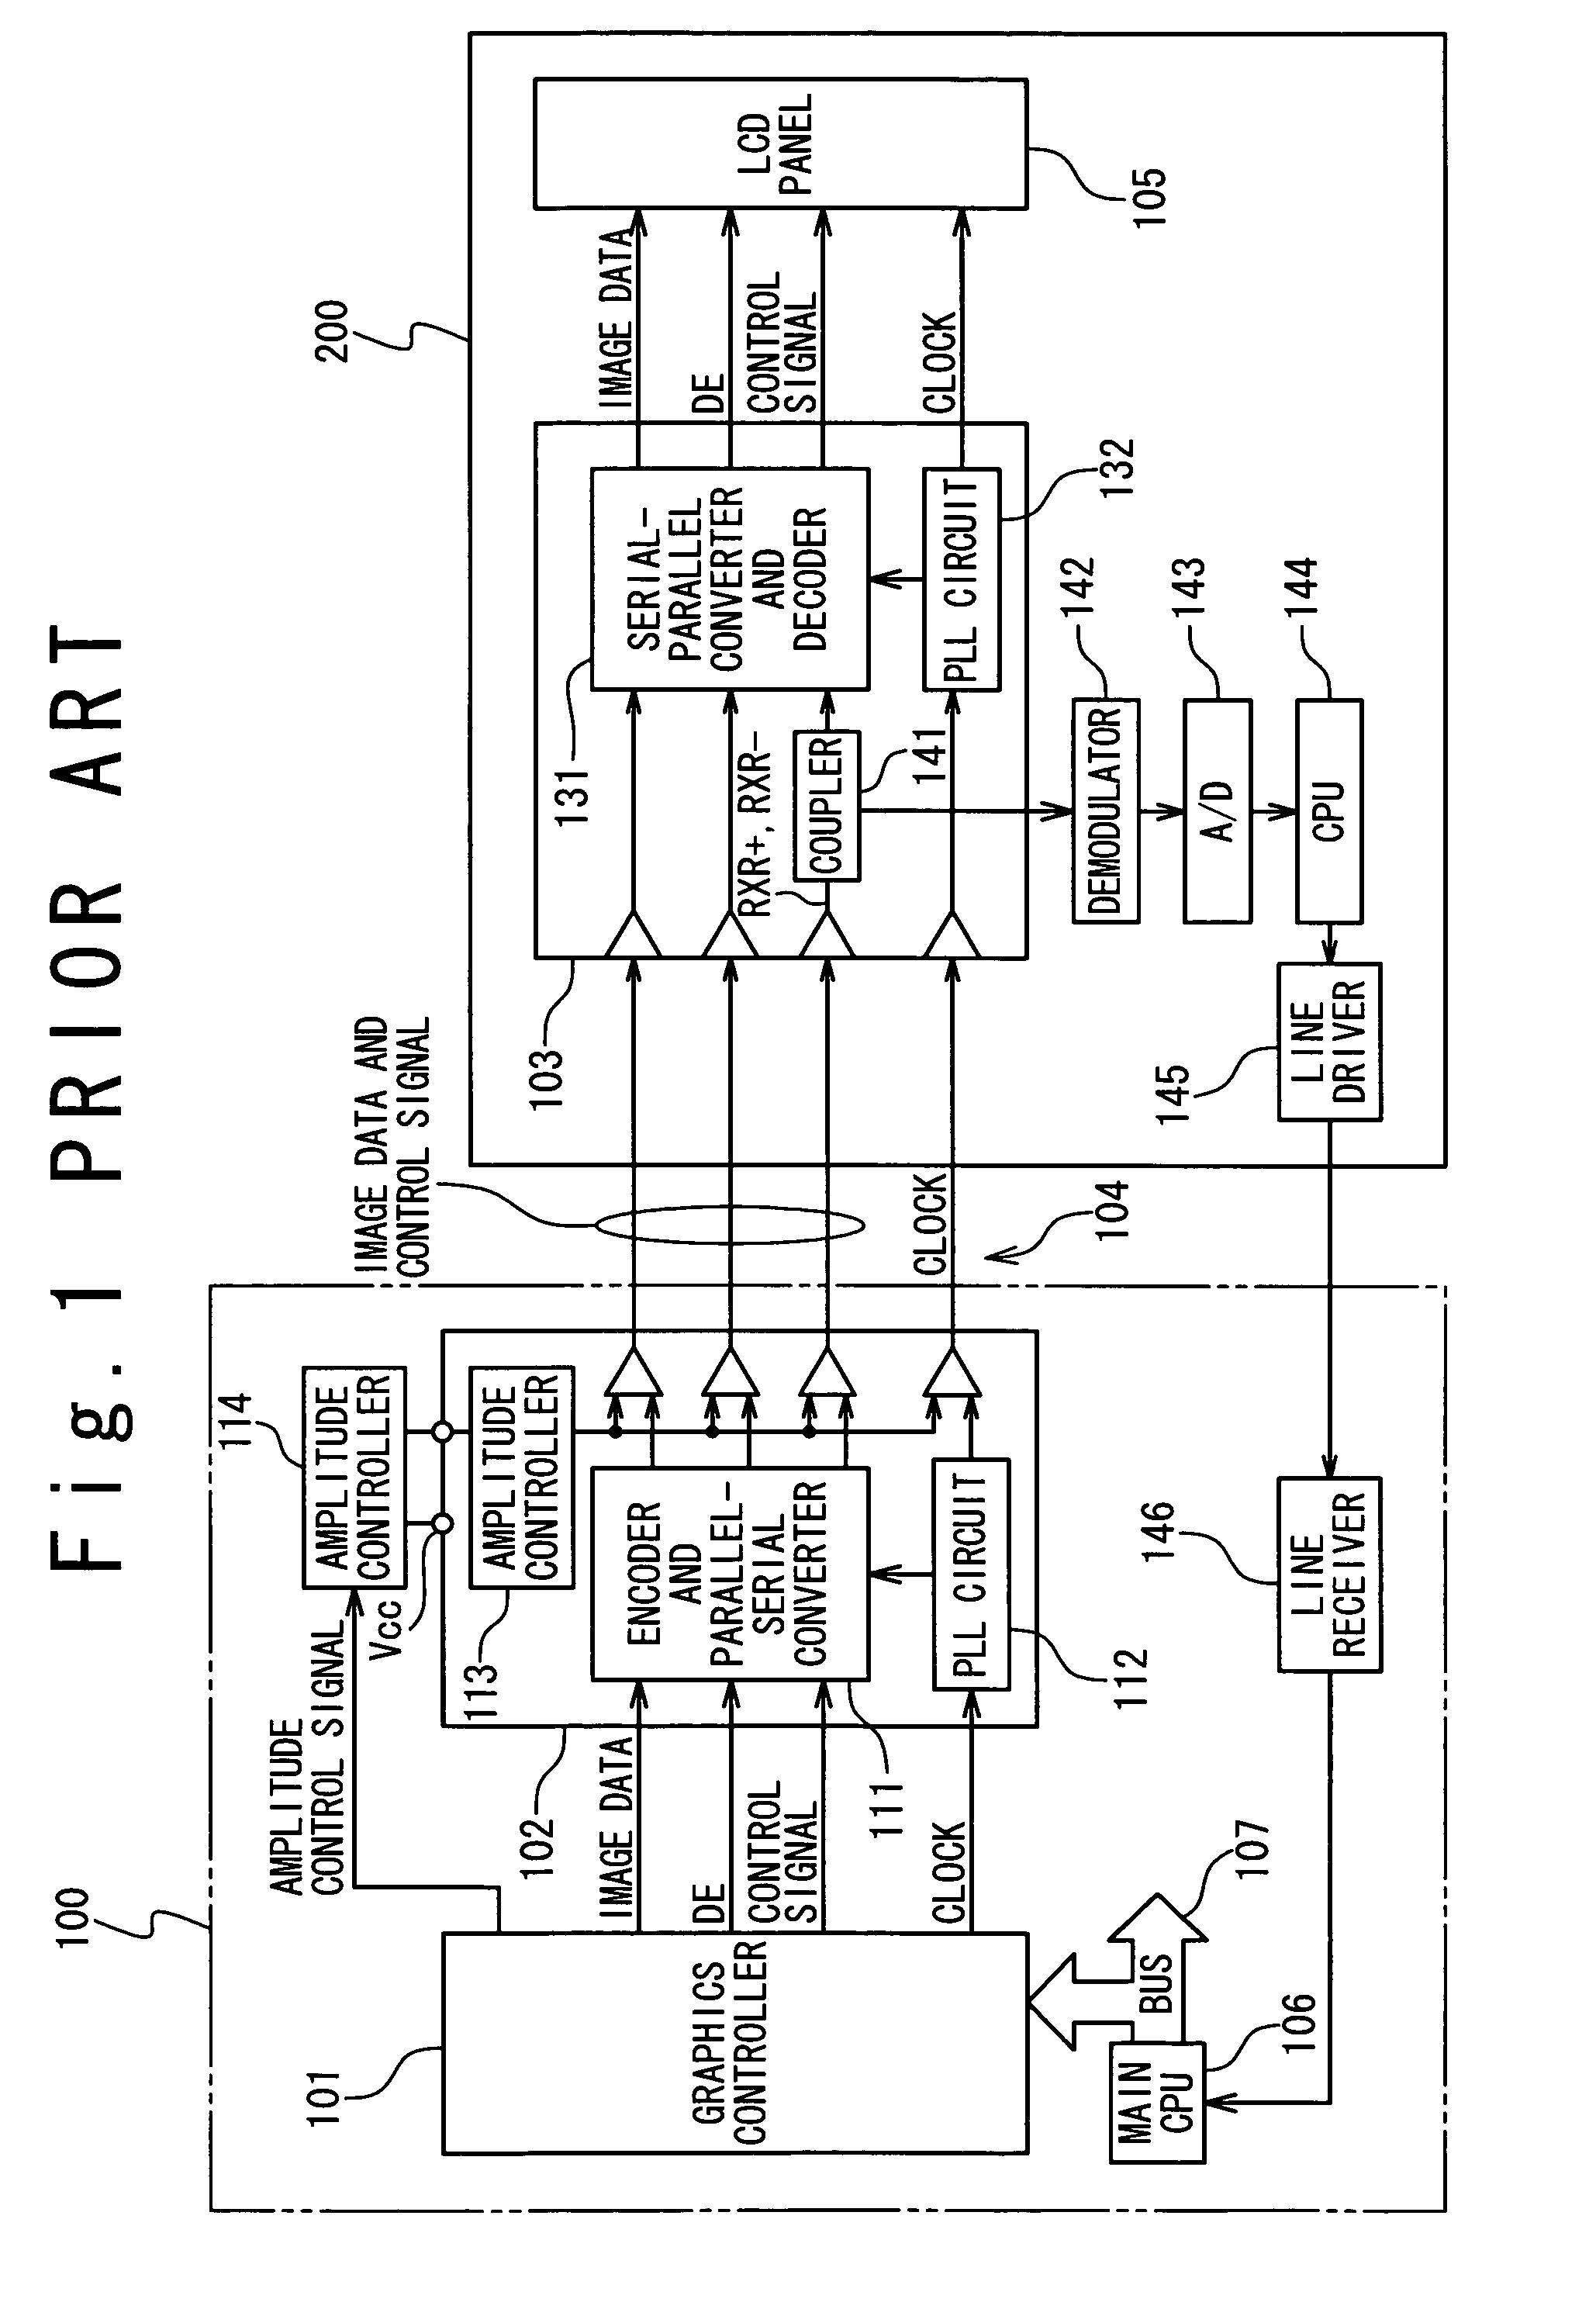 Data transfer apparatus for low voltage differential signaling